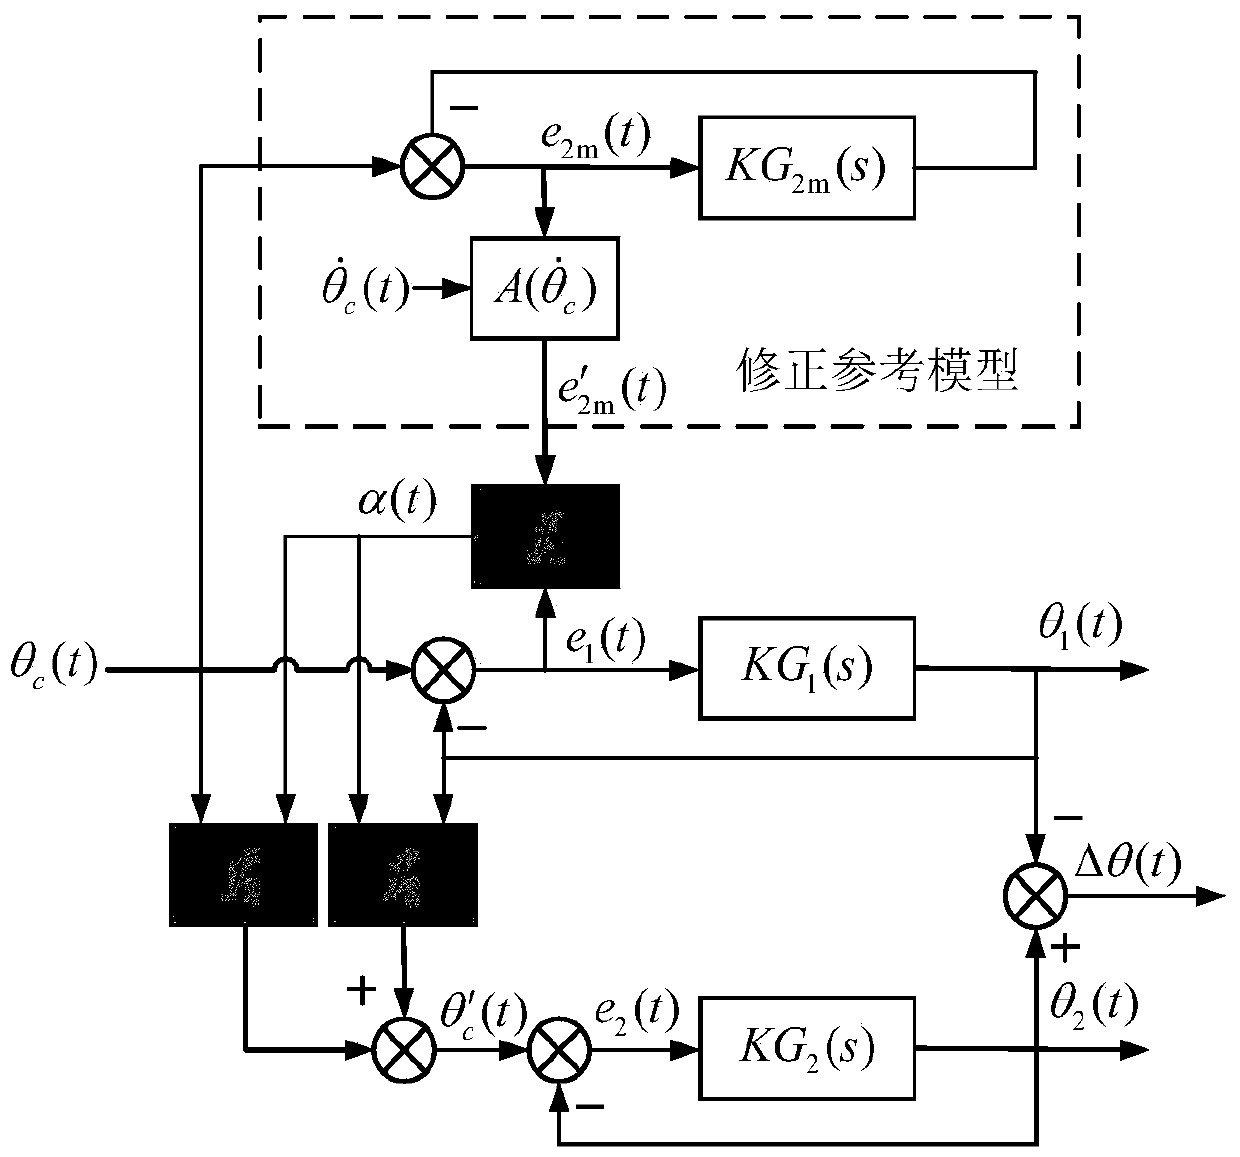 A Synchronous Control Method for Two-axis Turntable Based on Modified Reference Model